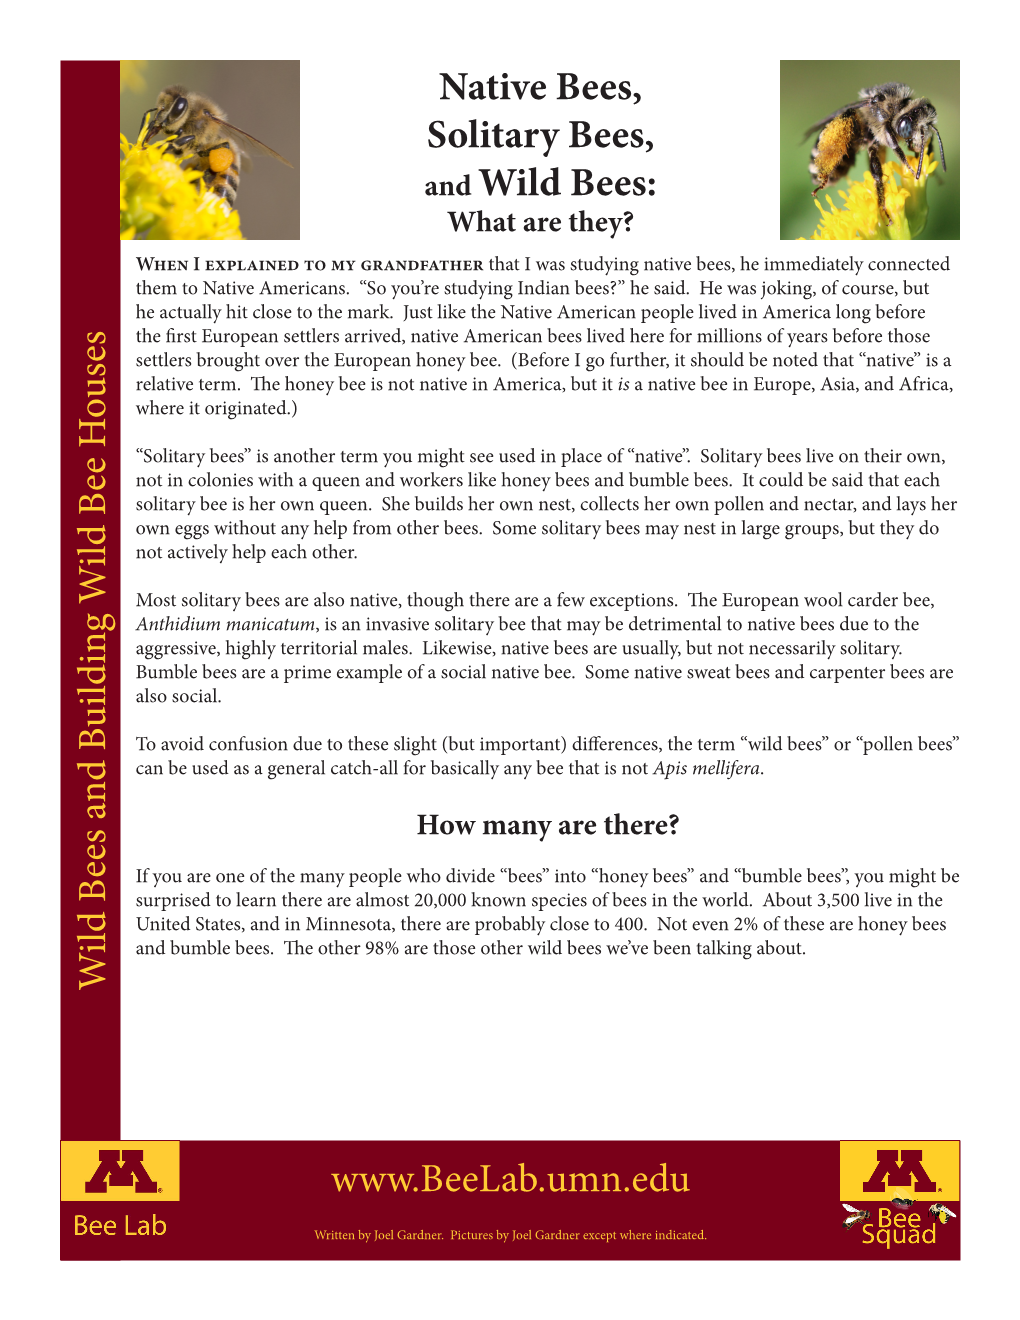 Native Bees, Solitary Bees, and Wild Bees